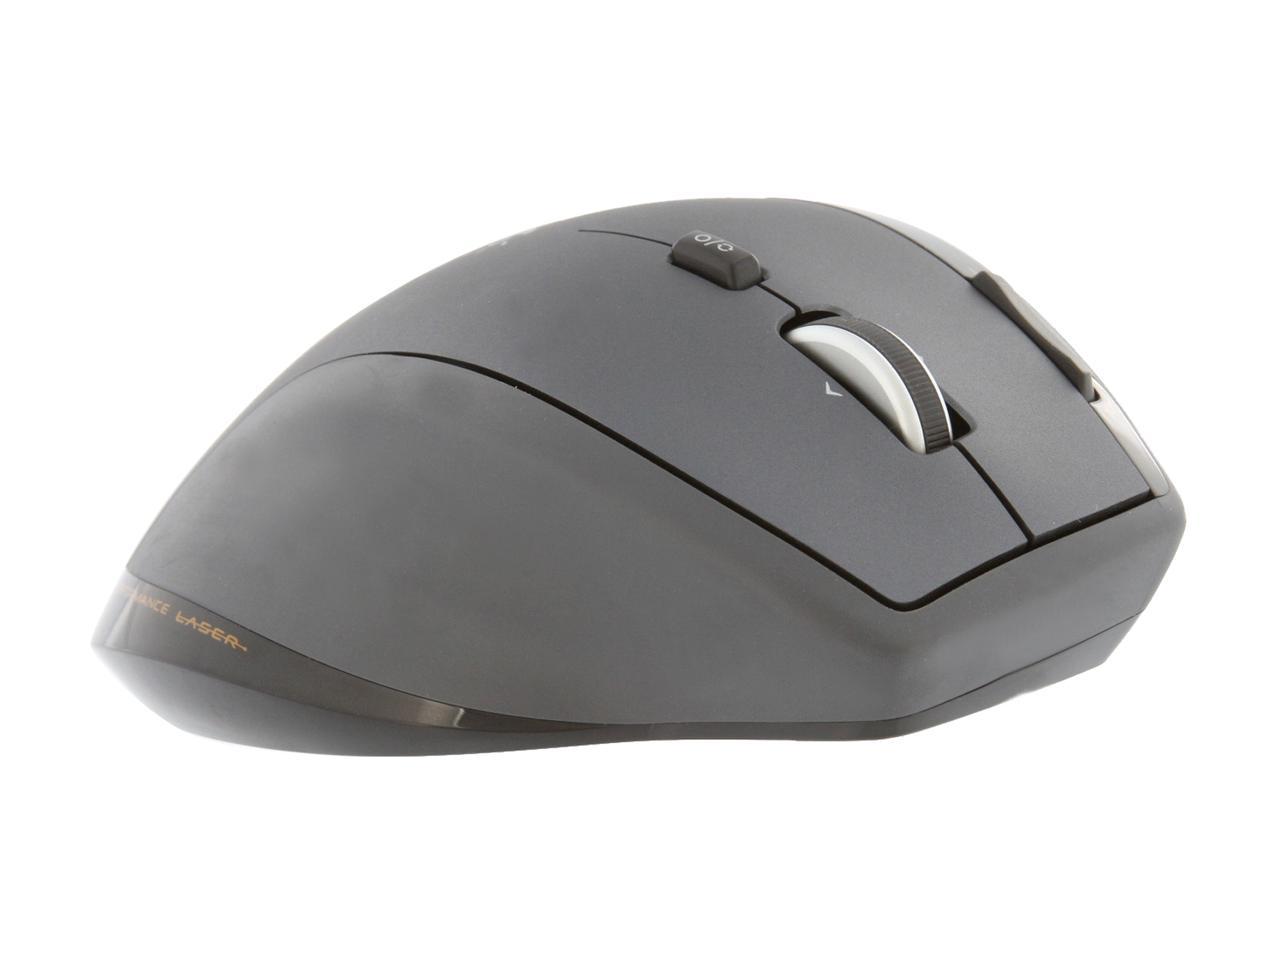 Used - Very Good: 1100 Black 2.4 GHz Cordless Mouse - Newegg.com